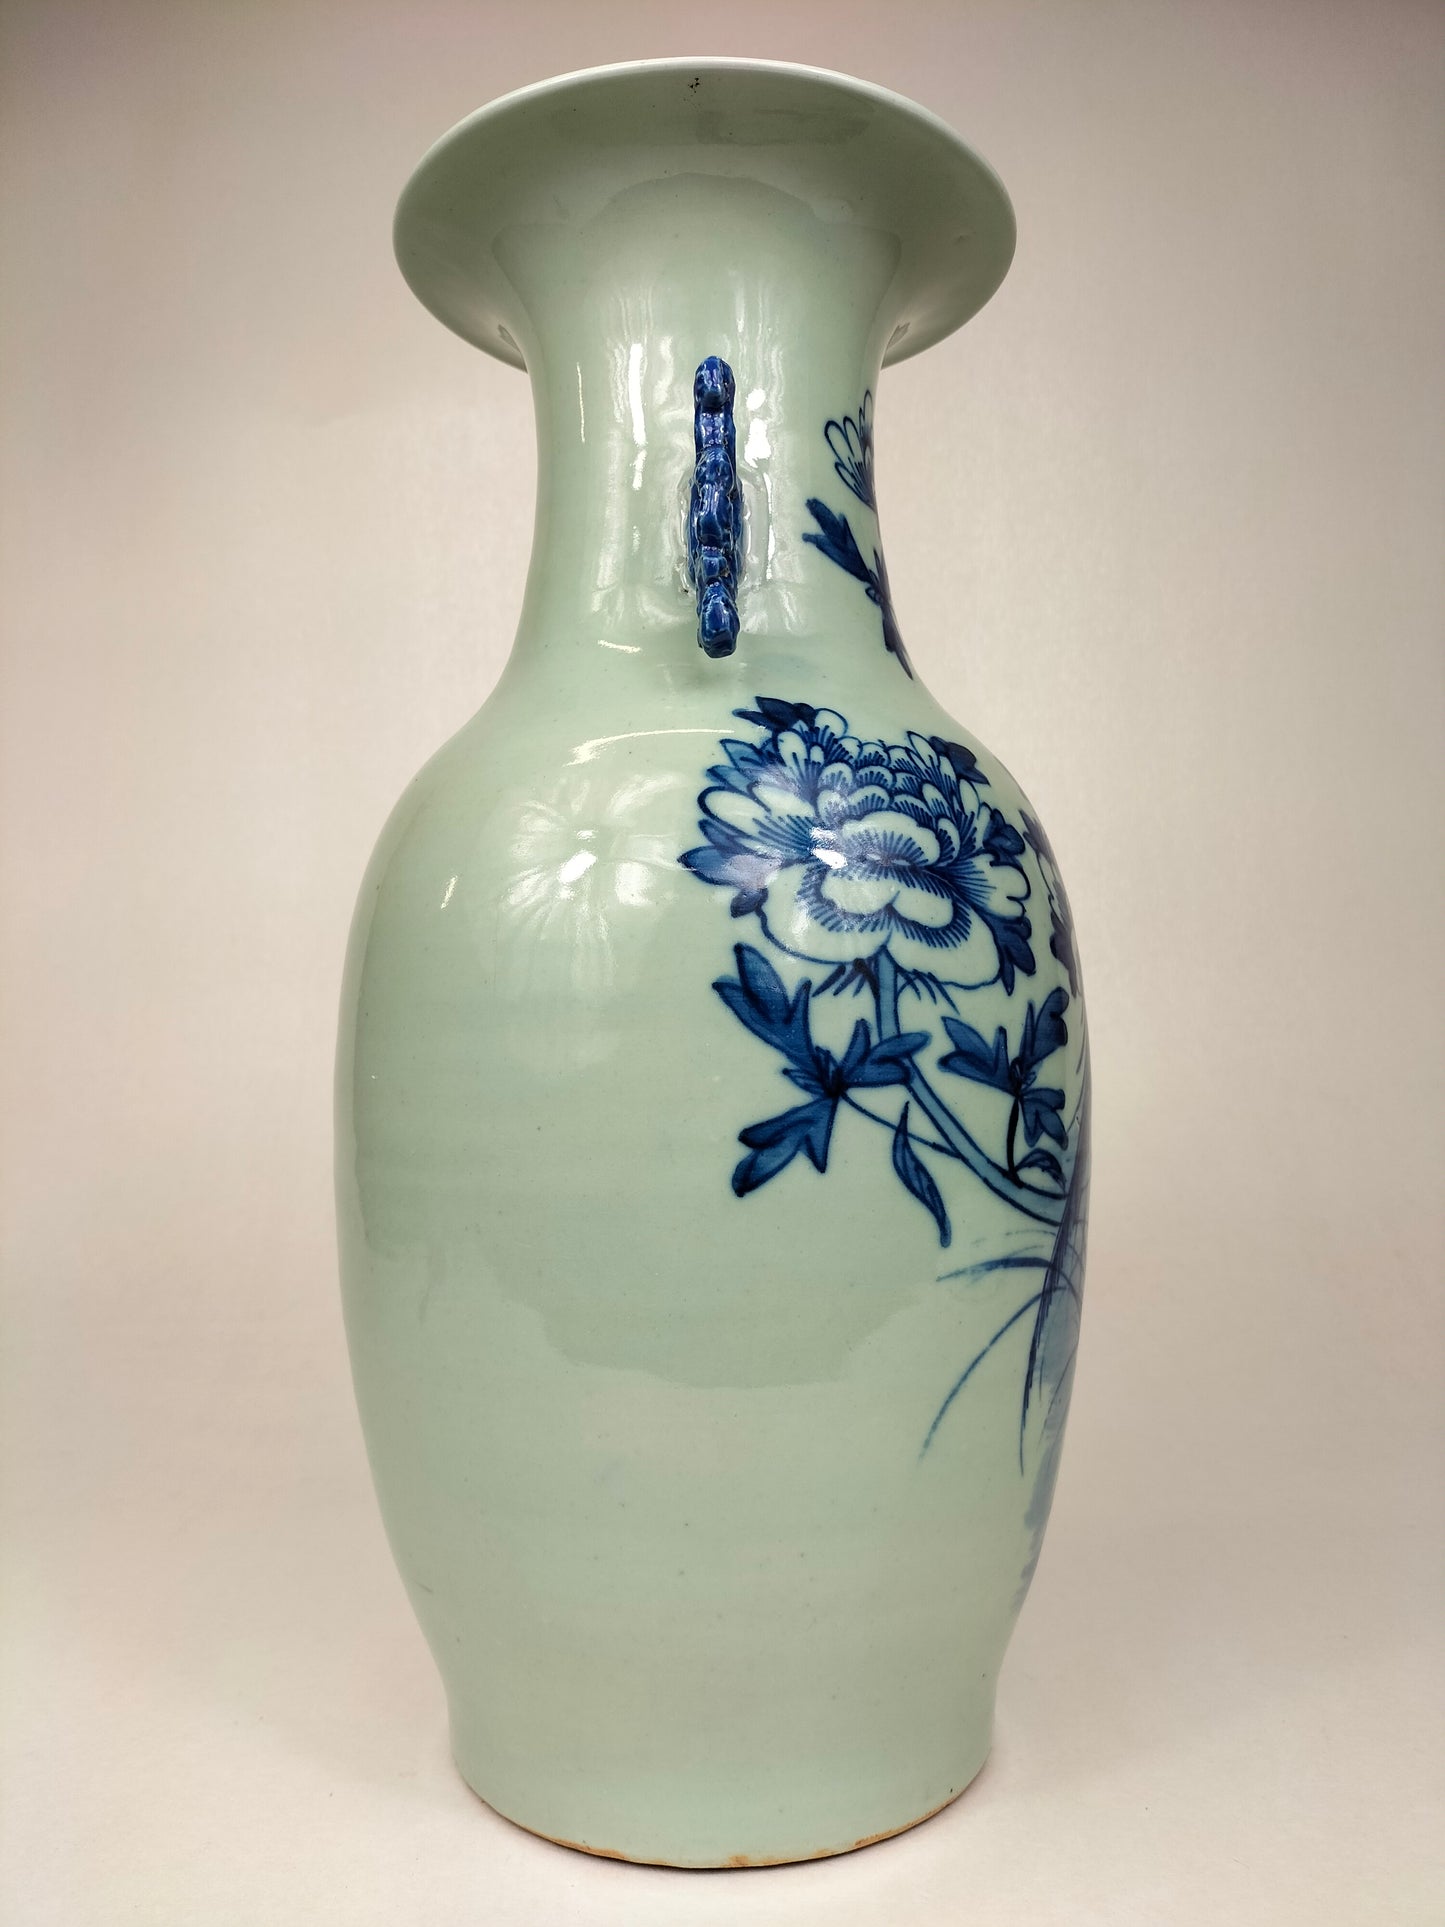 Antique Chinese vase decorated with bird and flowers // Qing Dynasty - 19th century